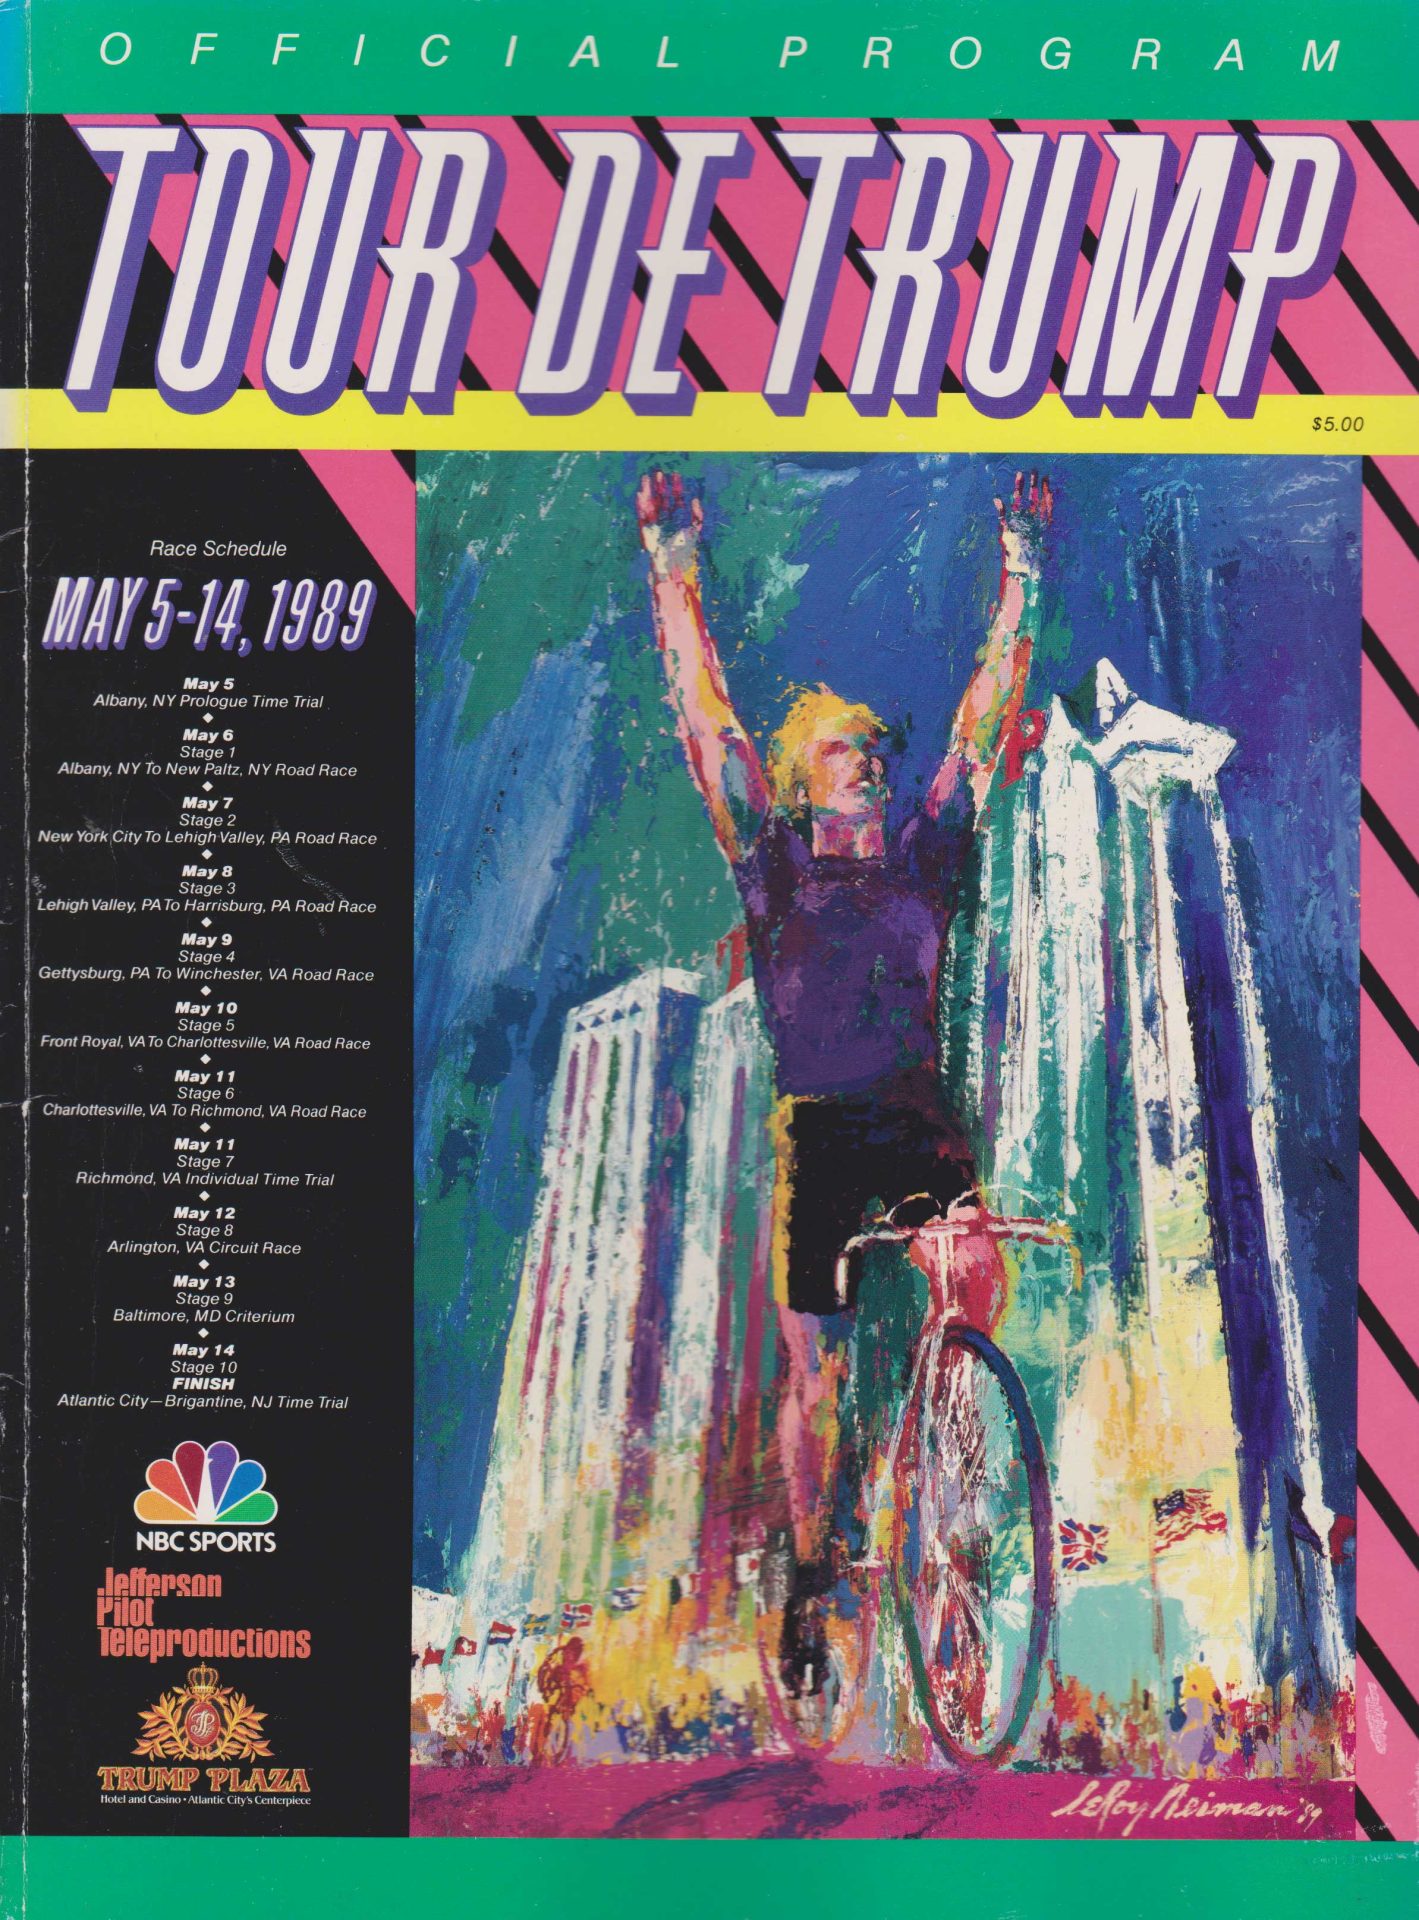 Front cover of the 1989 Tour de Trump official program, featuring a stylised artwork of a cyclist raising his arms in victory.